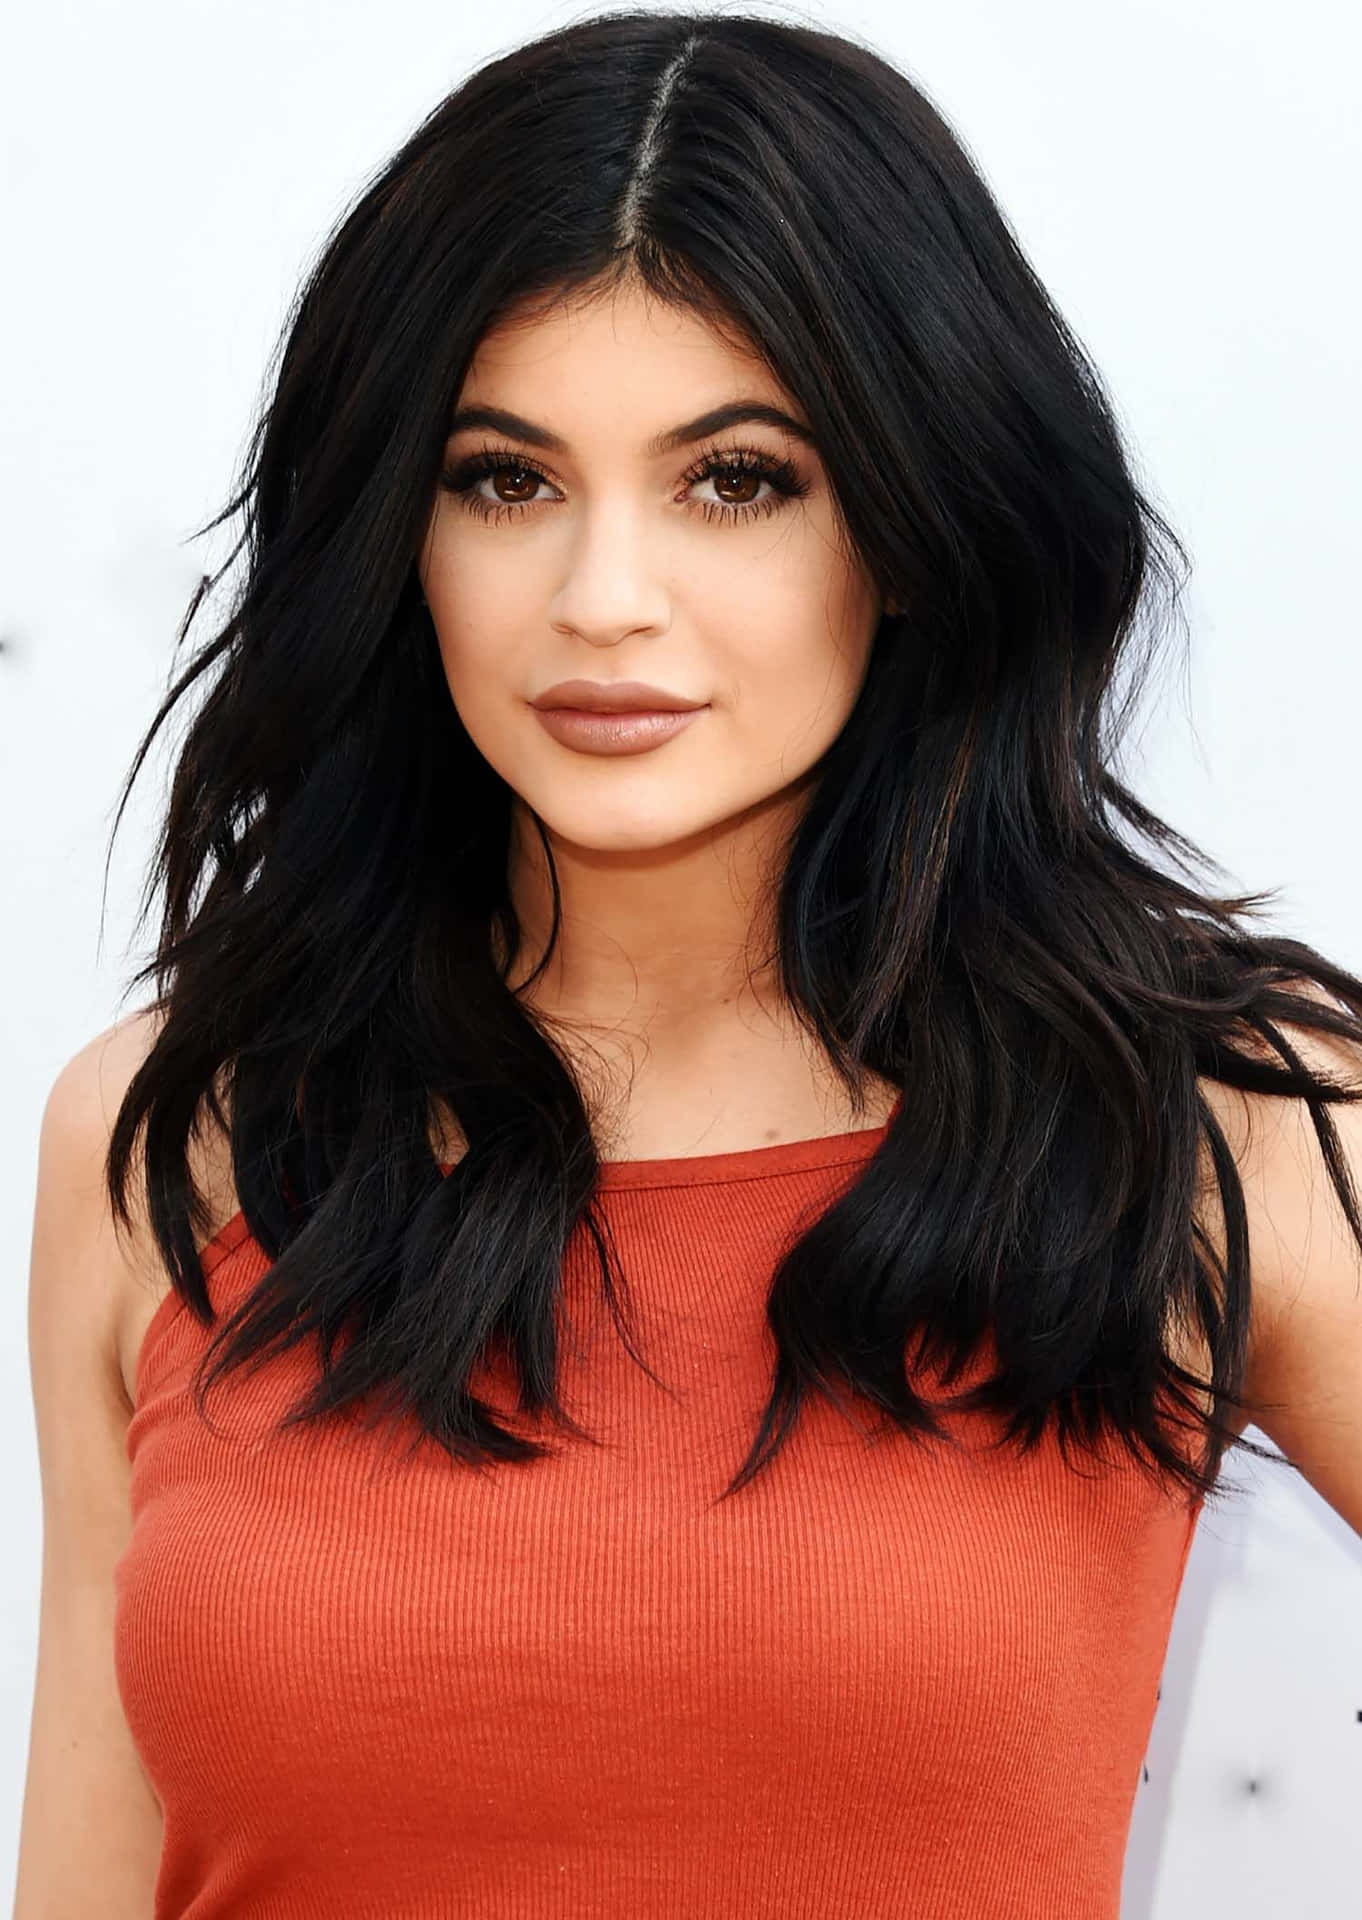 Kylie Jenner done up in head-to-toe glam.